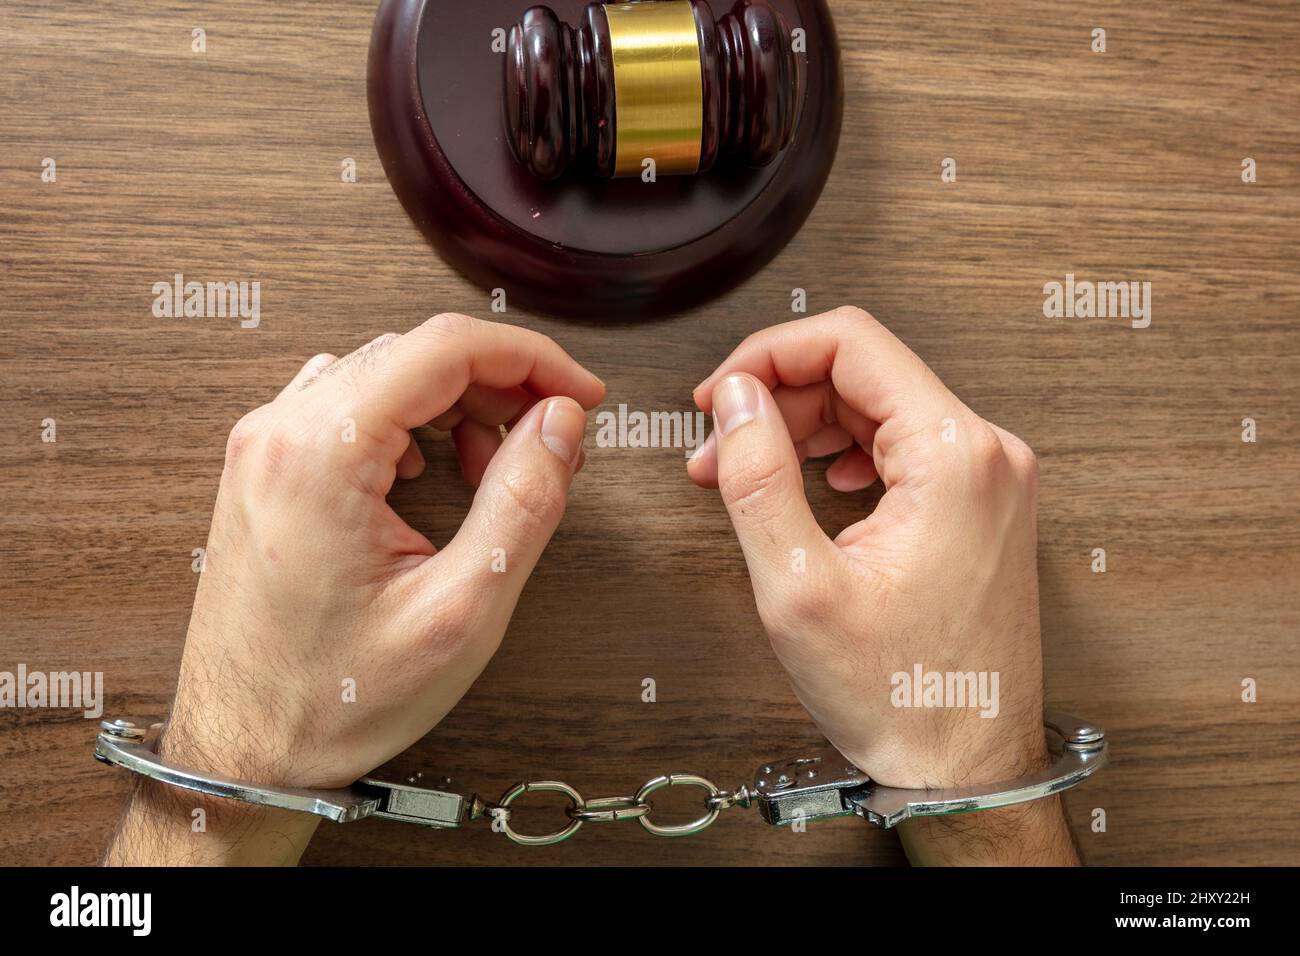 Law offender and Justice. Court sentence Prison. Handcuffed Convict, Handcuff locked and judge gavel on a wooden table, top view. Stock Photo